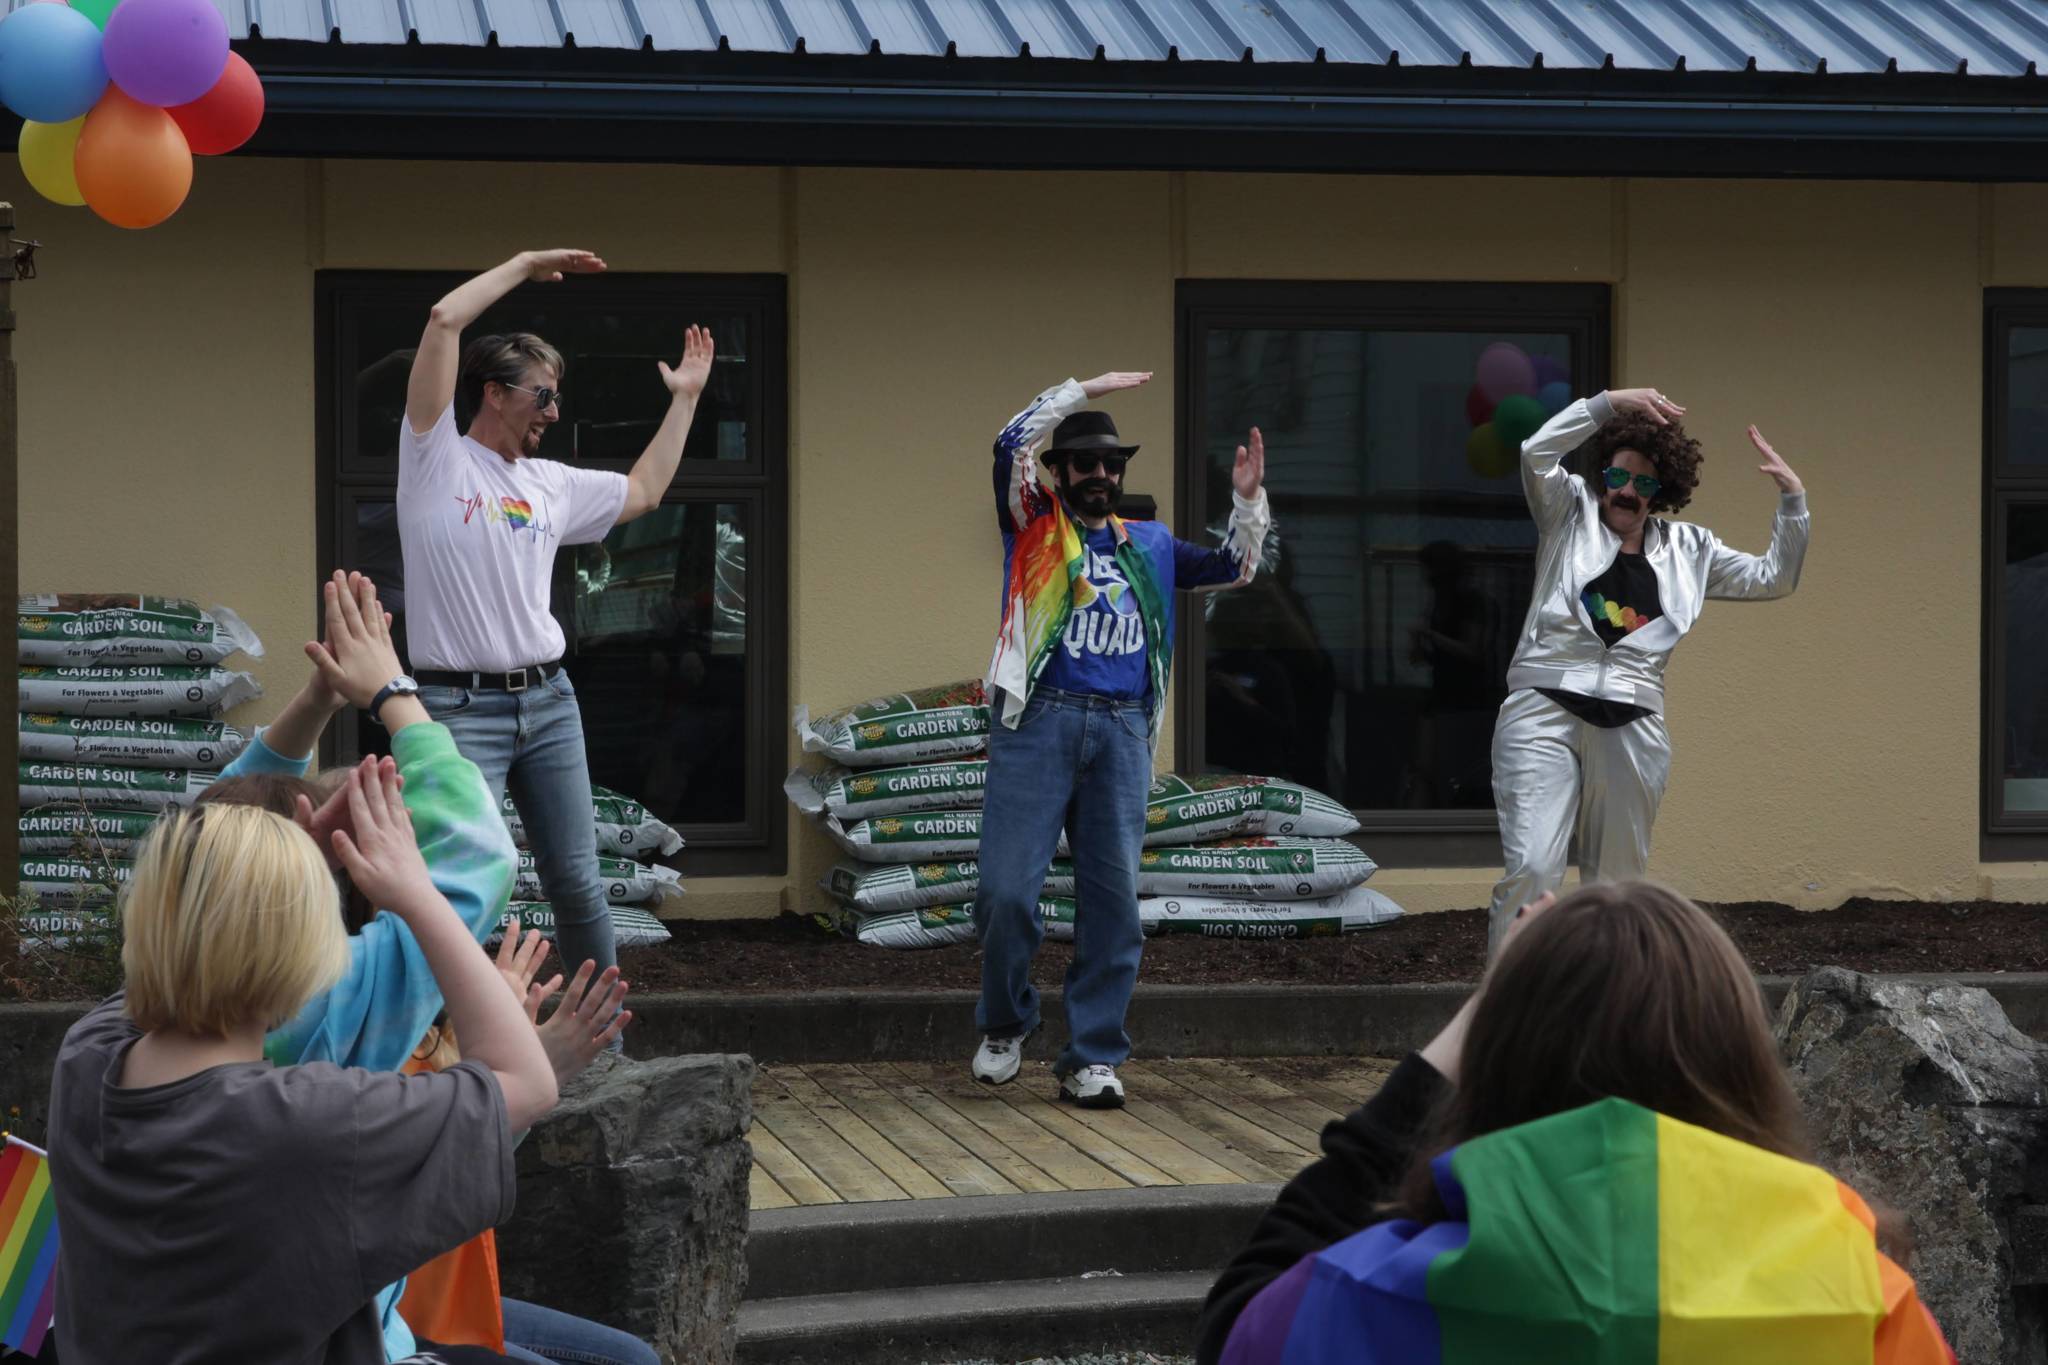 Drag performers dance to “YMCA” by the Village People at the Zach Gordon Youth Center’s Pride Month event at the center on Saturday, June 12, 2021. (Michael S. Lockett / Juneau Empire)